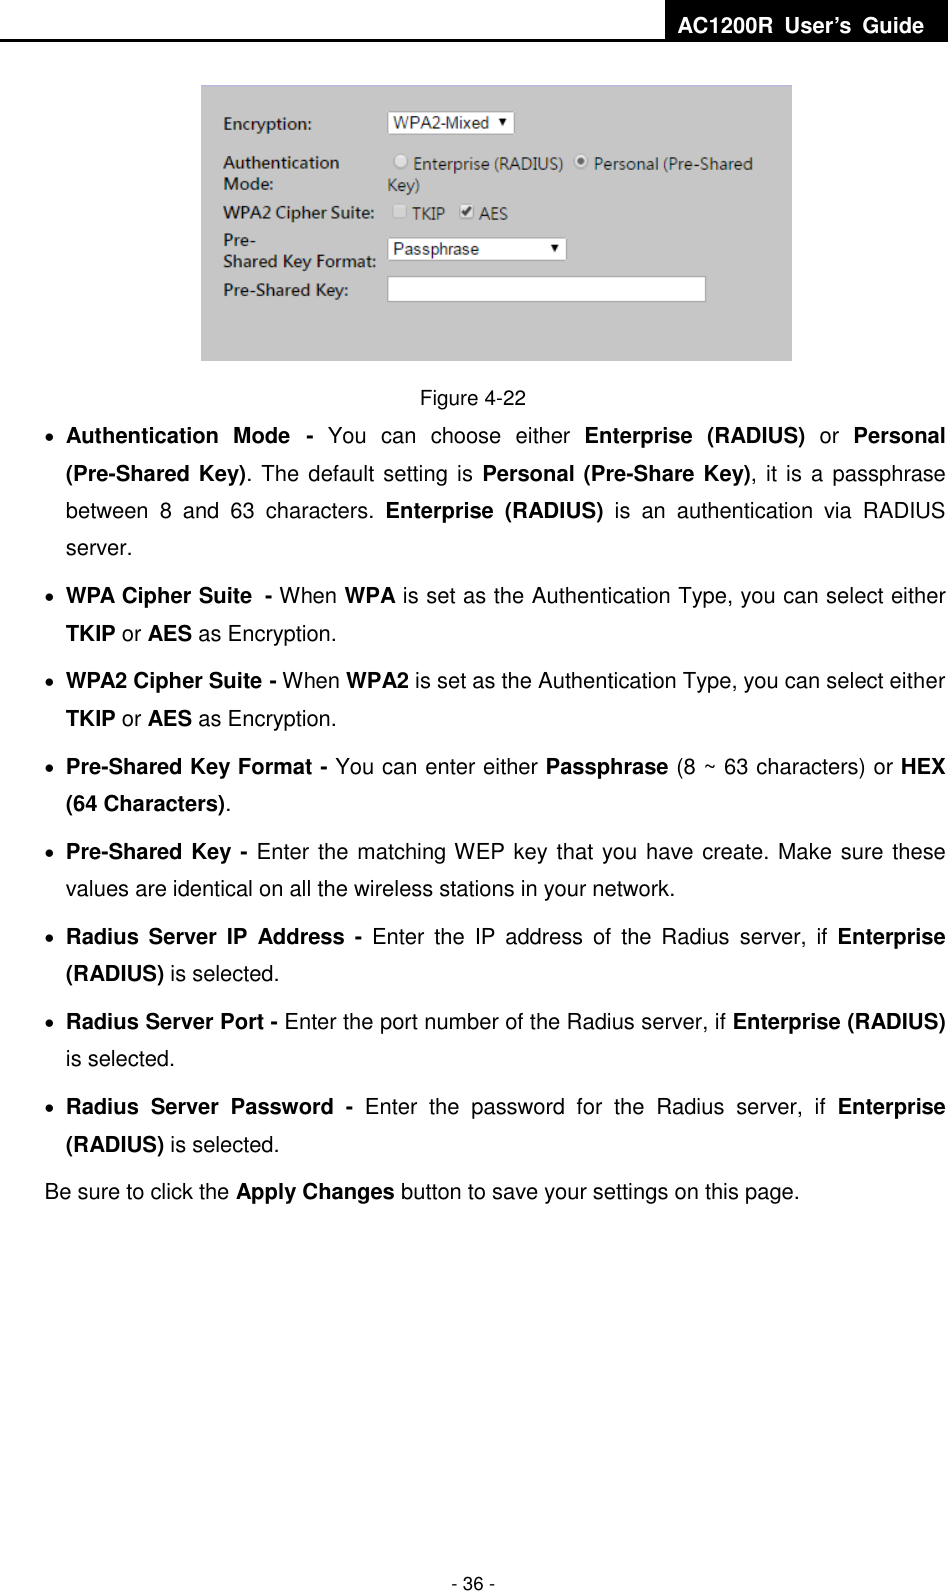  AC1200R  User’s  Guide  - 36 -  Figure 4-22  Authentication  Mode -  You  can  choose  either  Enterprise  (RADIUS)  or  Personal (Pre-Shared Key). The default setting is Personal (Pre-Share Key), it is a passphrase between  8  and  63  characters.  Enterprise  (RADIUS)  is  an  authentication  via  RADIUS server.  WPA Cipher Suite - When WPA is set as the Authentication Type, you can select either TKIP or AES as Encryption.  WPA2 Cipher Suite - When WPA2 is set as the Authentication Type, you can select either TKIP or AES as Encryption.  Pre-Shared Key Format - You can enter either Passphrase (8 ~ 63 characters) or HEX (64 Characters).      Pre-Shared Key - Enter the matching WEP key that you have create. Make sure these values are identical on all the wireless stations in your network.  Radius Server  IP  Address -  Enter  the  IP  address  of  the  Radius  server,  if  Enterprise (RADIUS) is selected.  Radius Server Port - Enter the port number of the Radius server, if Enterprise (RADIUS) is selected.  Radius  Server  Password  -  Enter  the  password  for  the  Radius  server,  if  Enterprise (RADIUS) is selected. Be sure to click the Apply Changes button to save your settings on this page.      